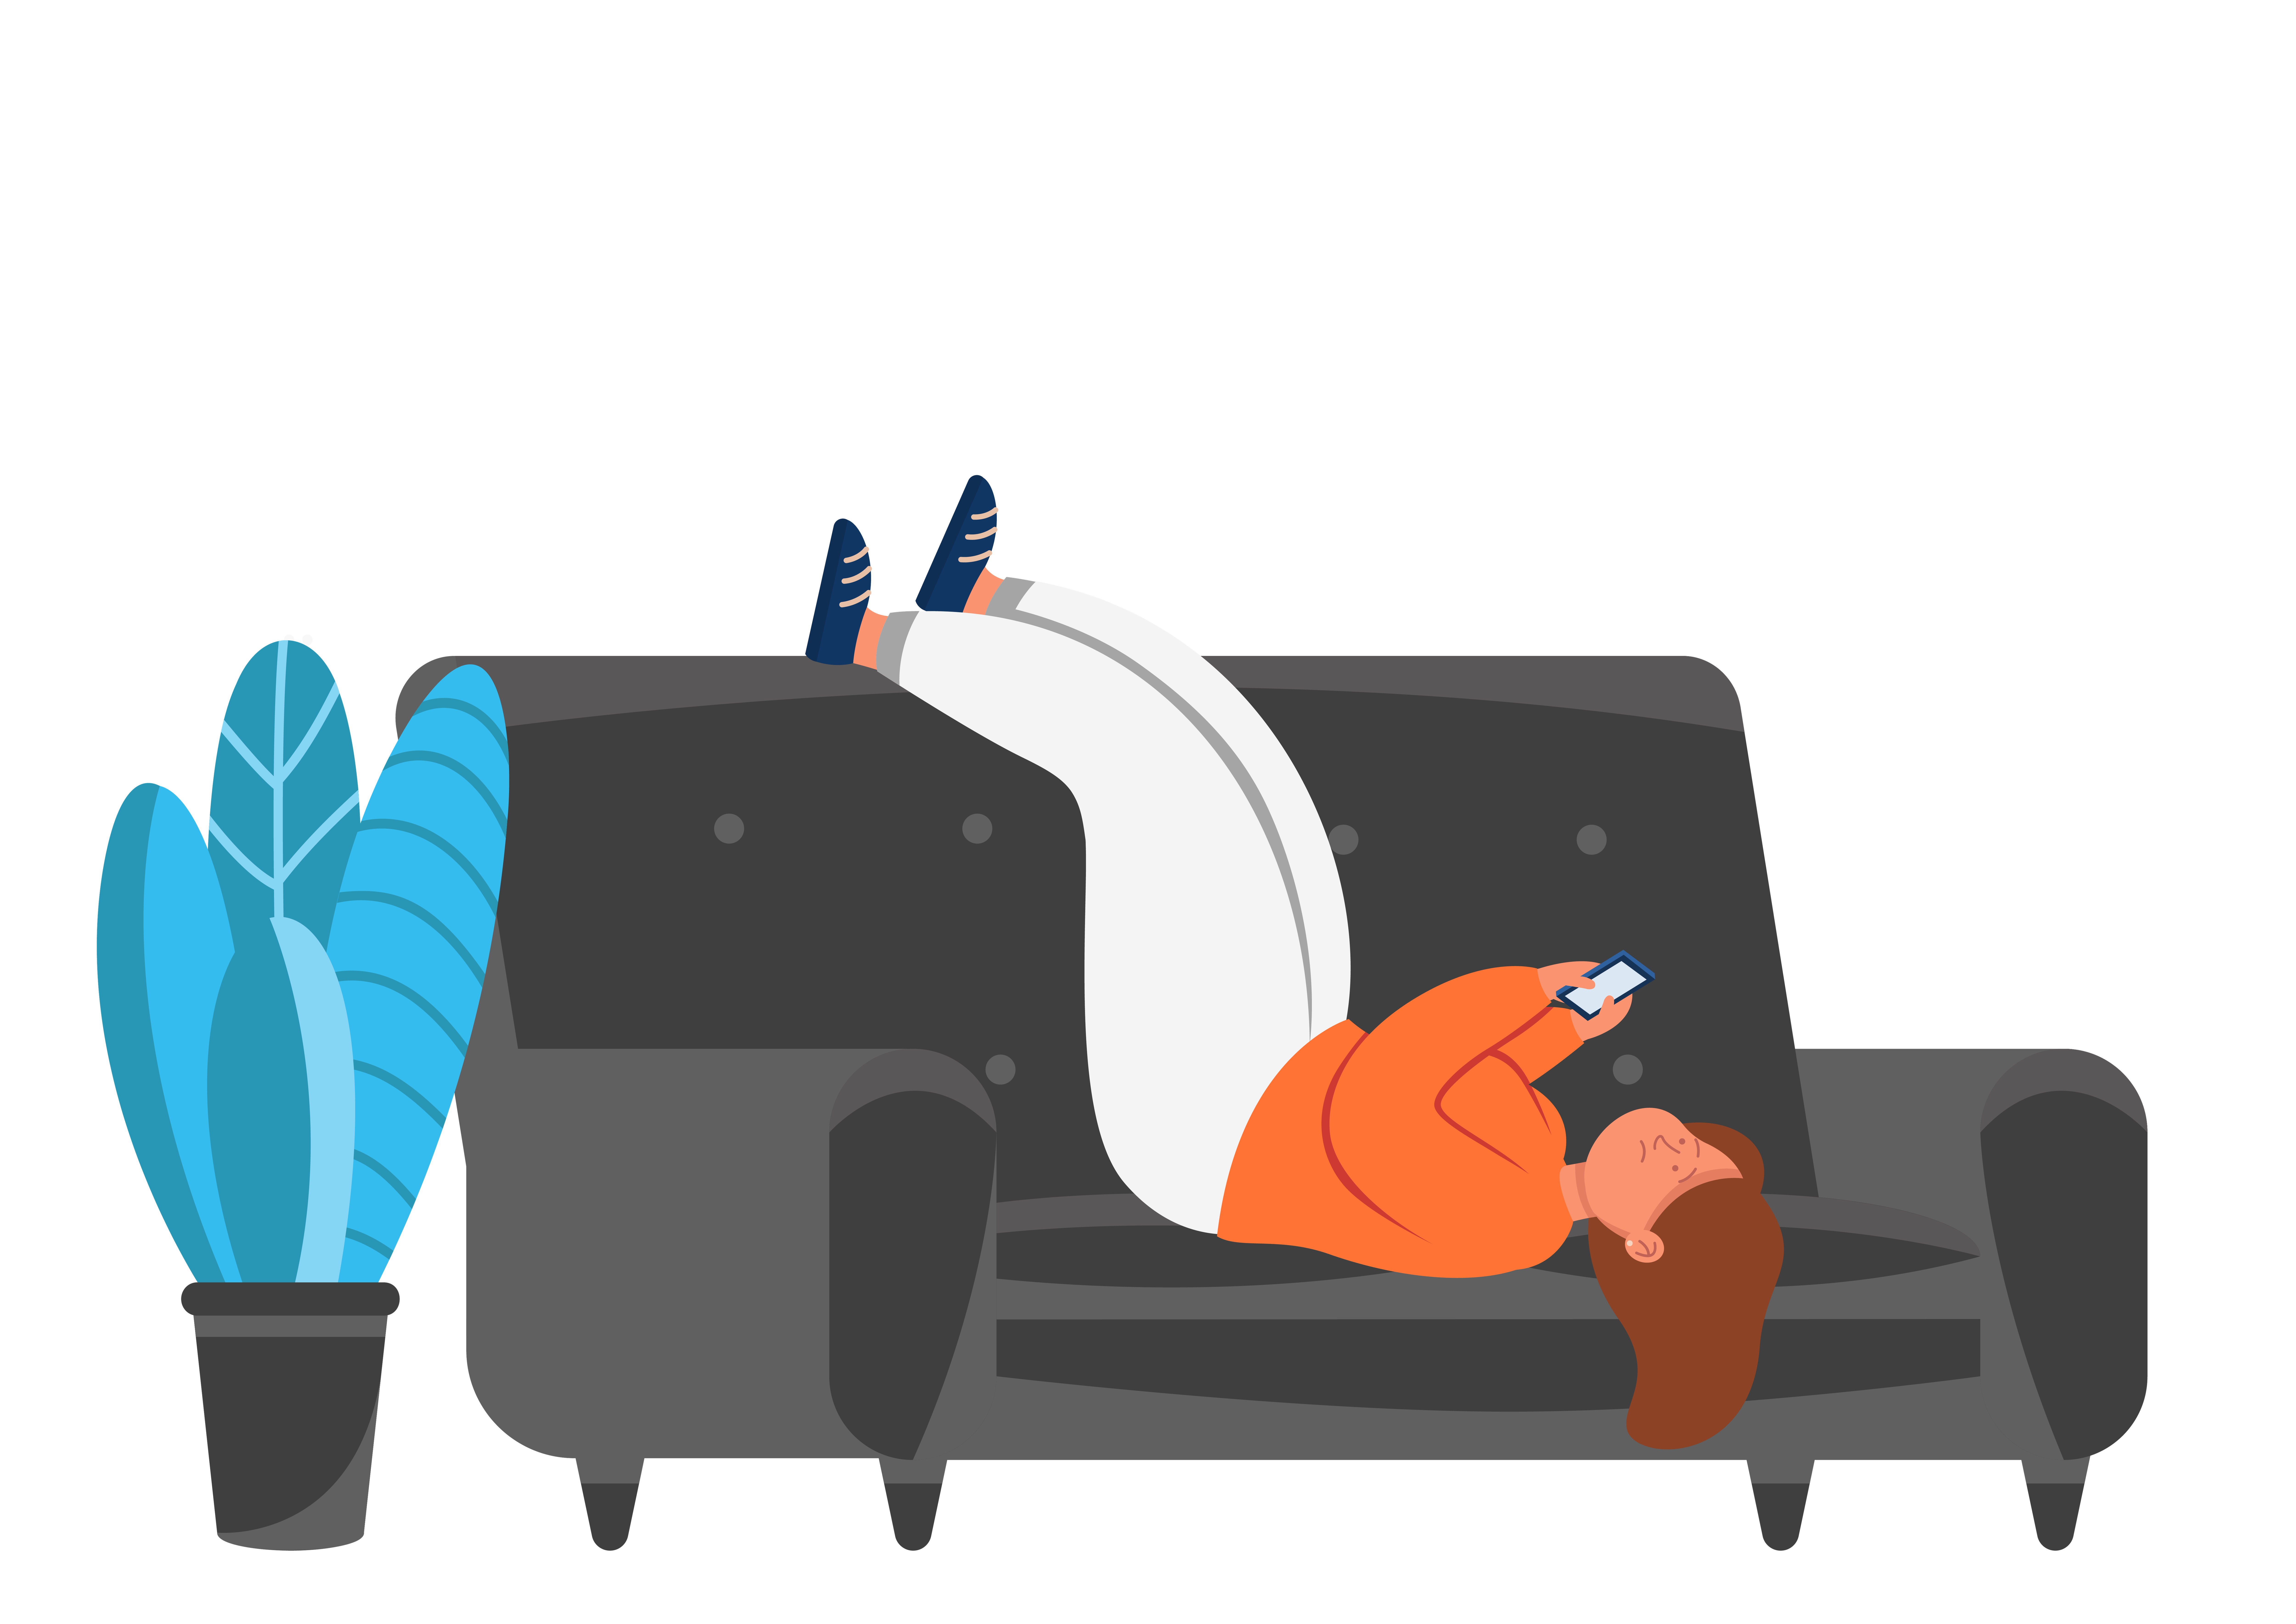 illustration of a girl on the sofa on her phone